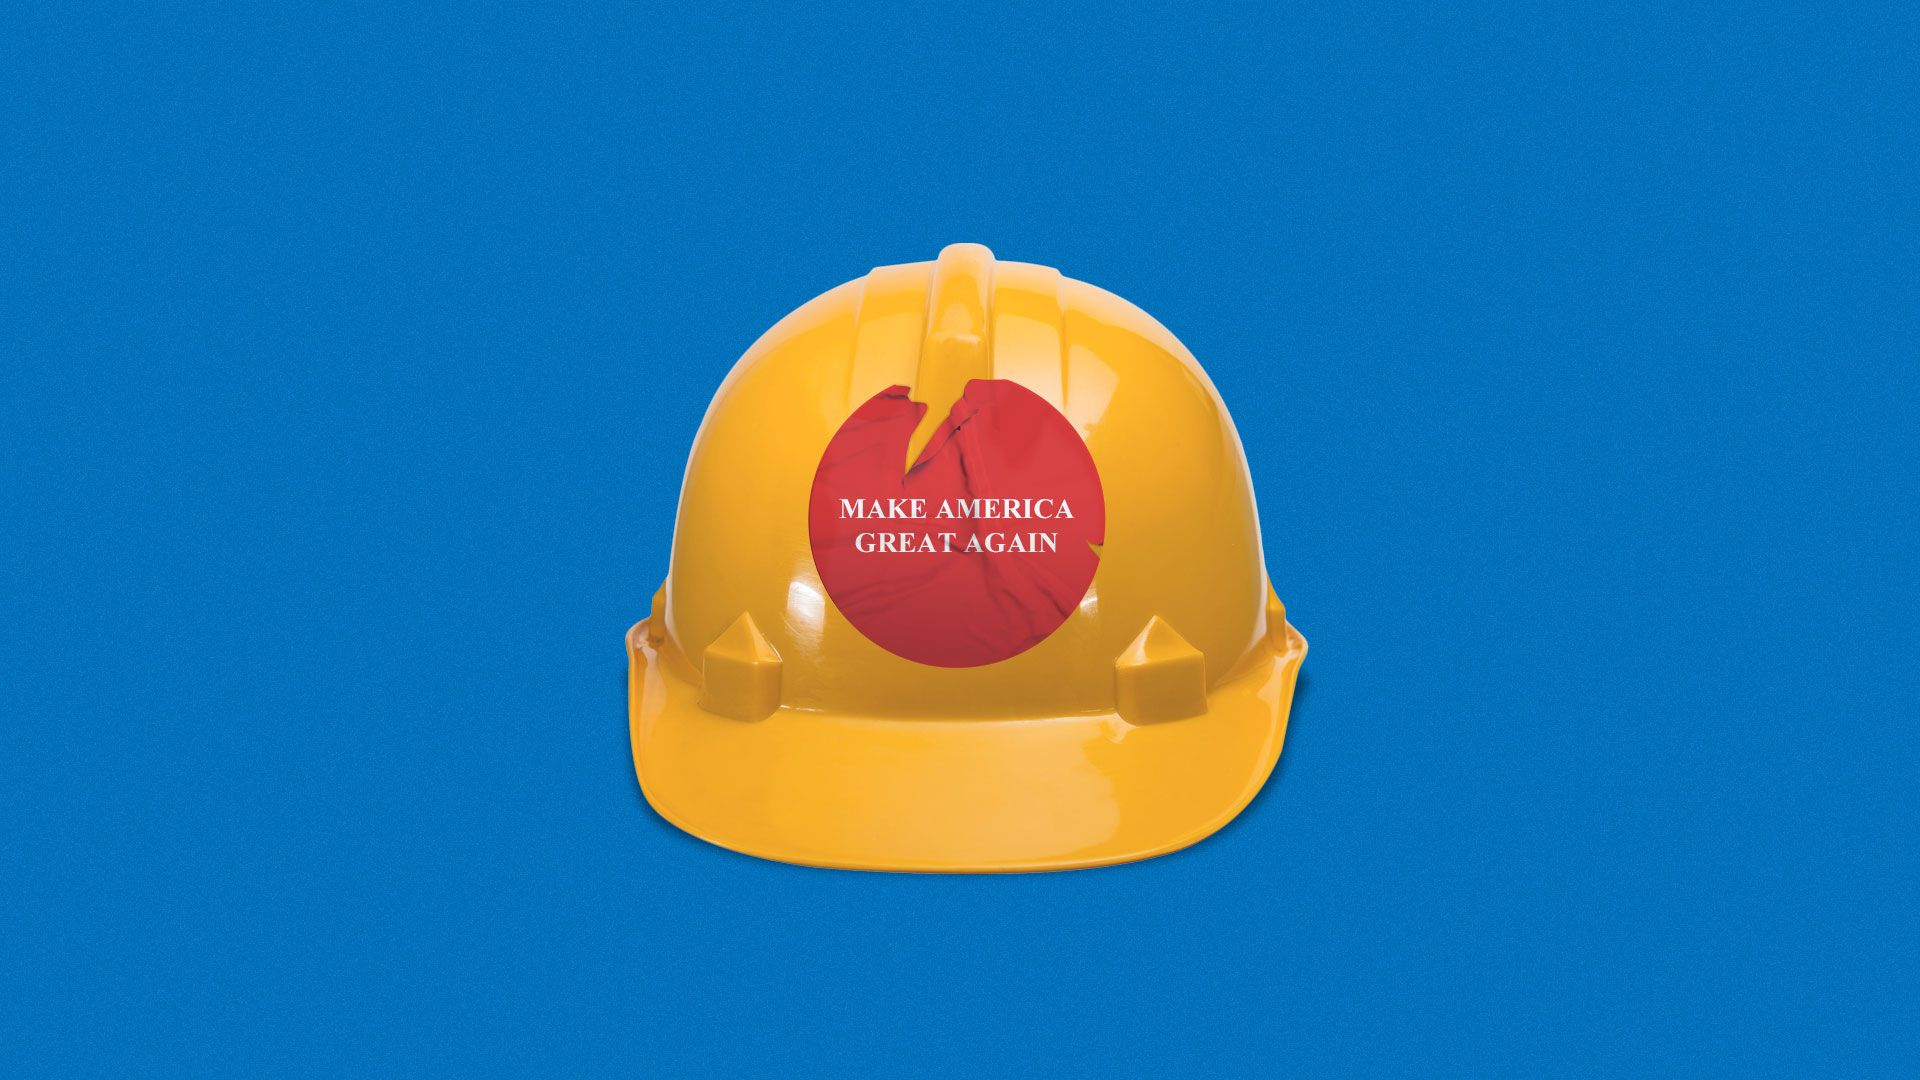 Illustration of a hard hat with an old, peeling Make America Great Again sticker